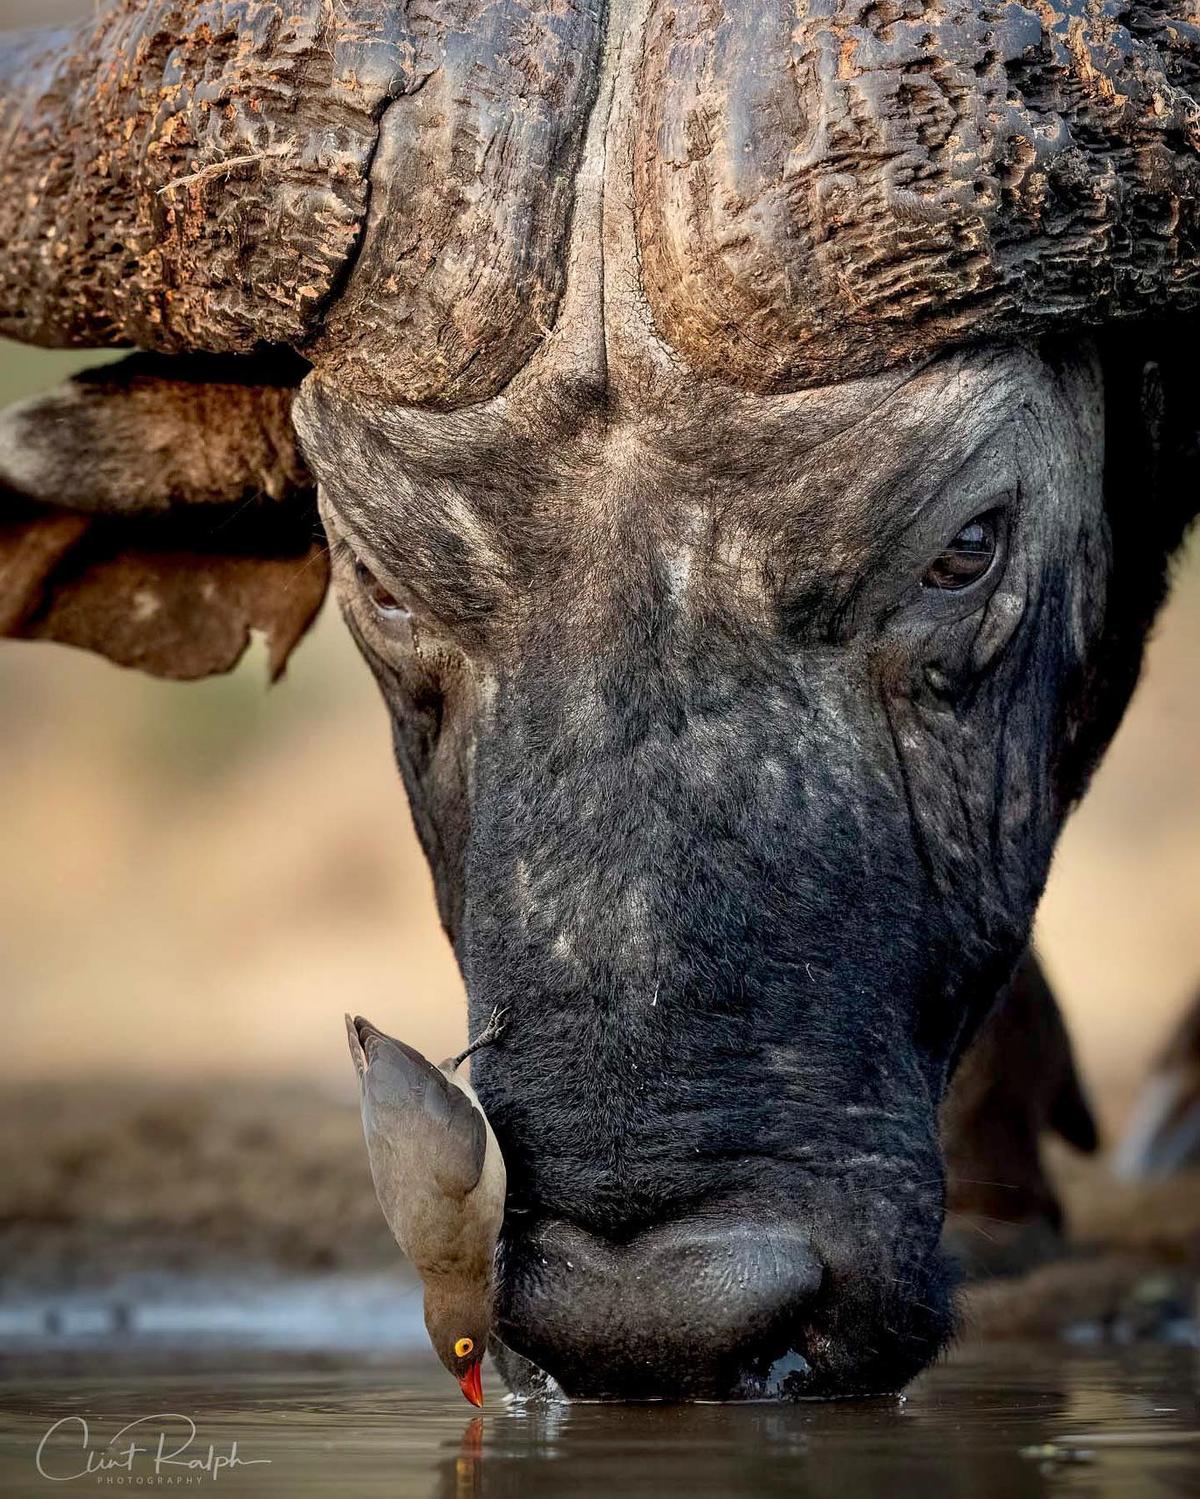 A red-billed oxpecker landing on an African buffalo's face to drink water. (Courtesy of <a href="https://clintralphphotography.co.za/">Clint Ralph Photography</a>)